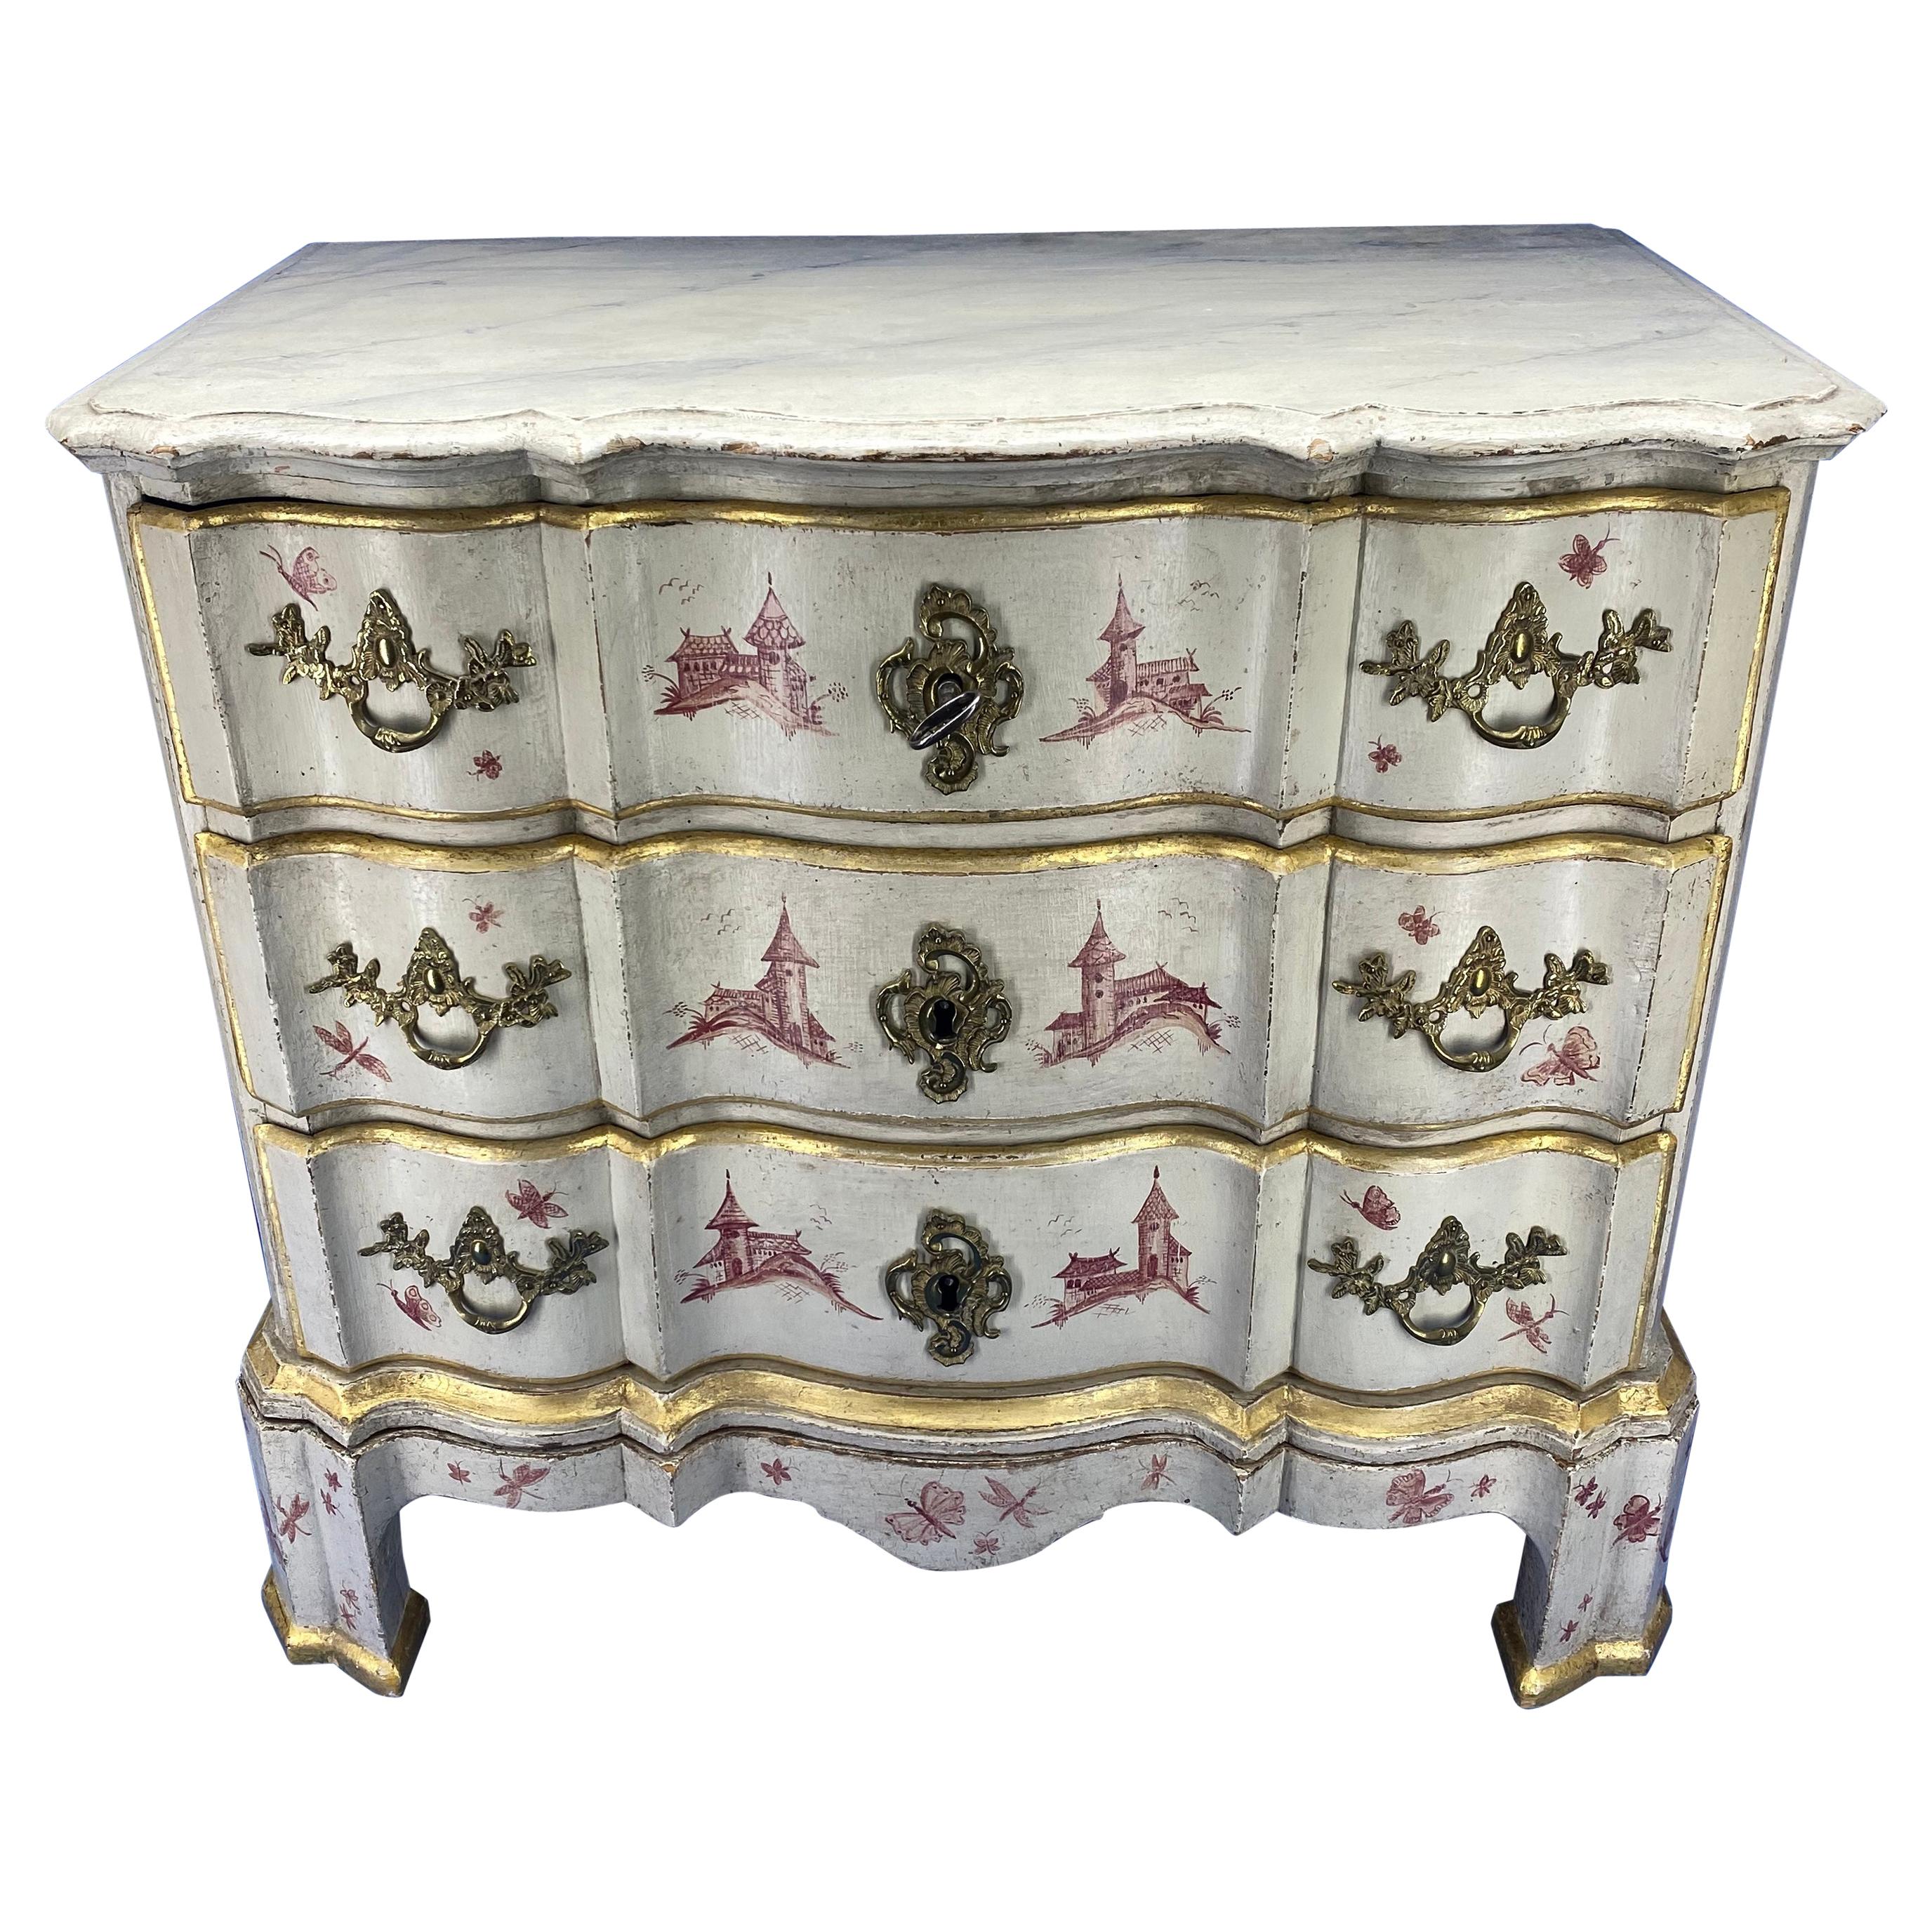 Danish 18th Century Painted Chest of Drawers With Chinoiserie Decor